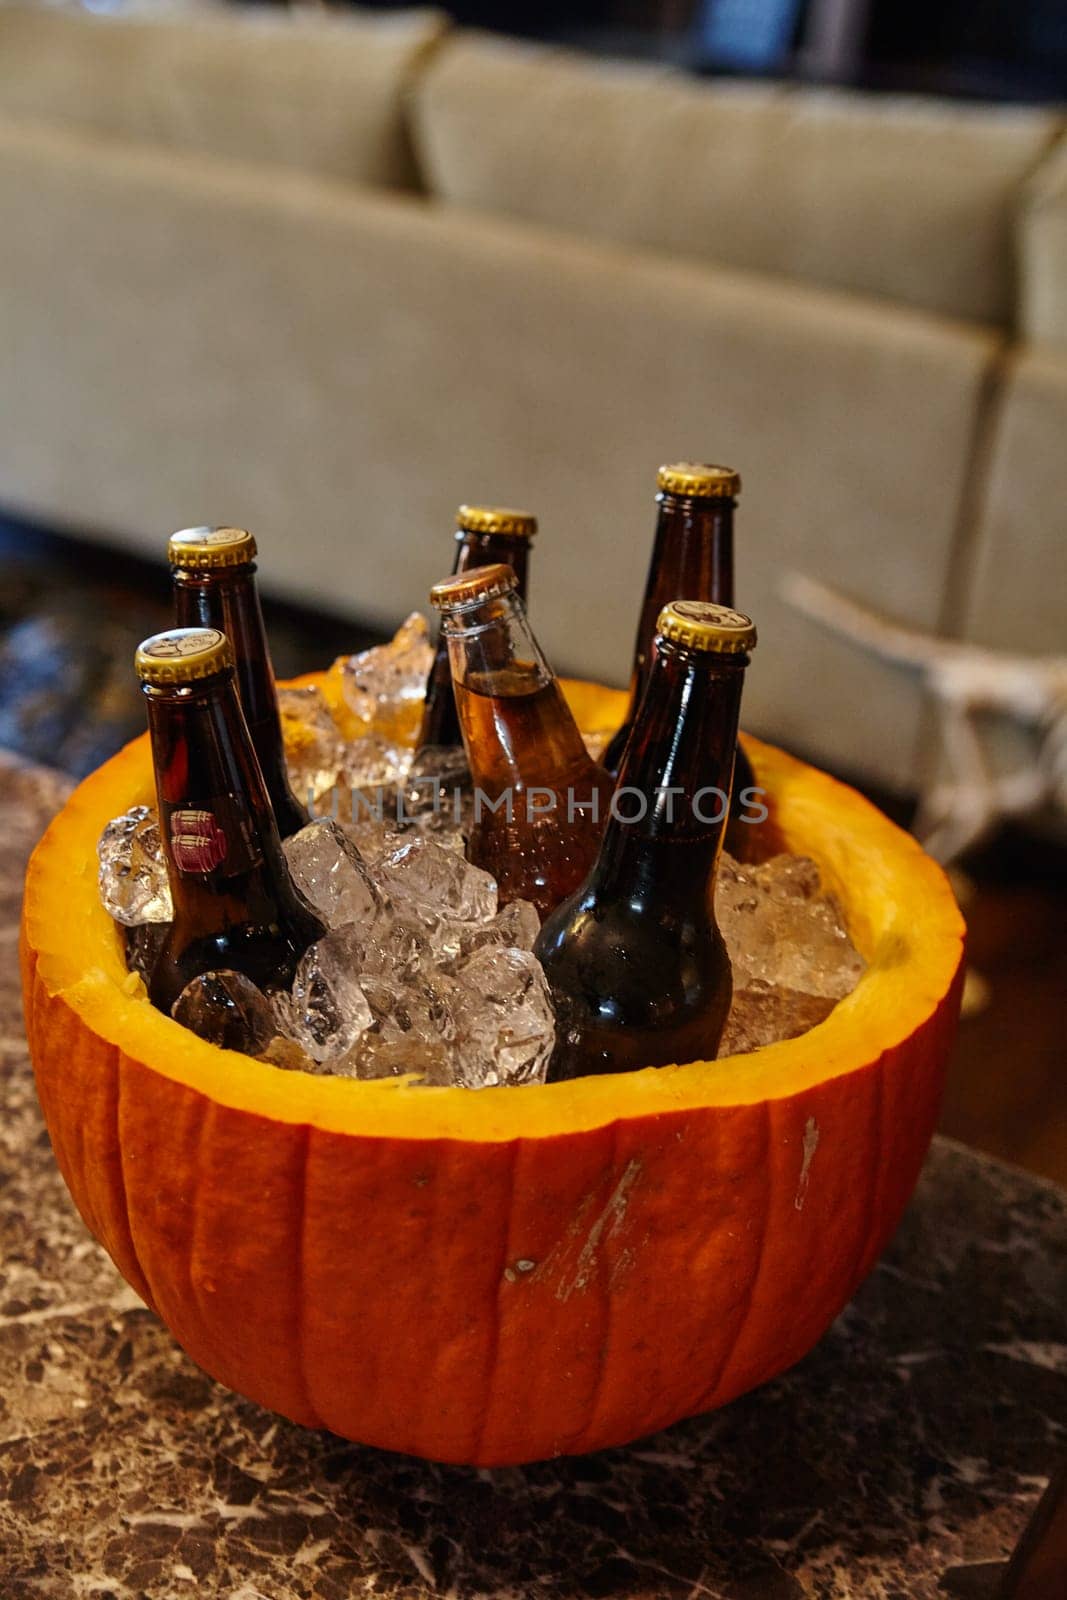 Creative autumnal beer presentation with a pumpkin cooler filled with a selection of dark glass beer bottles on a marbled counter surface. Perfect for festive gatherings and seasonal celebrations. Fort Wayne, Indiana.